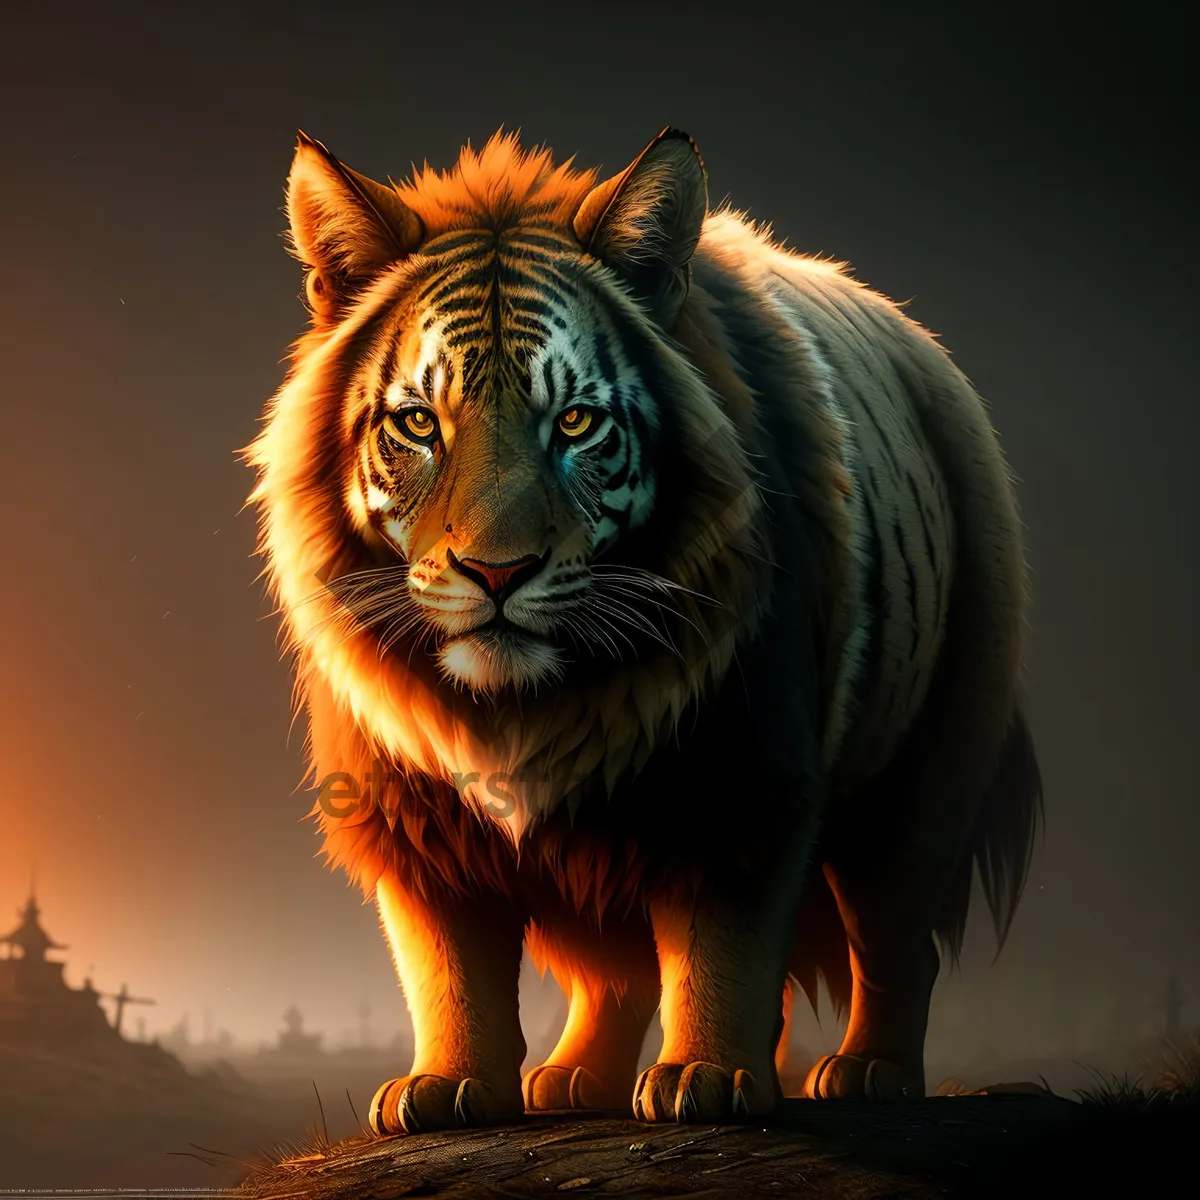 Picture of Wildcat King: Majestic Tiger Staring Dangerously